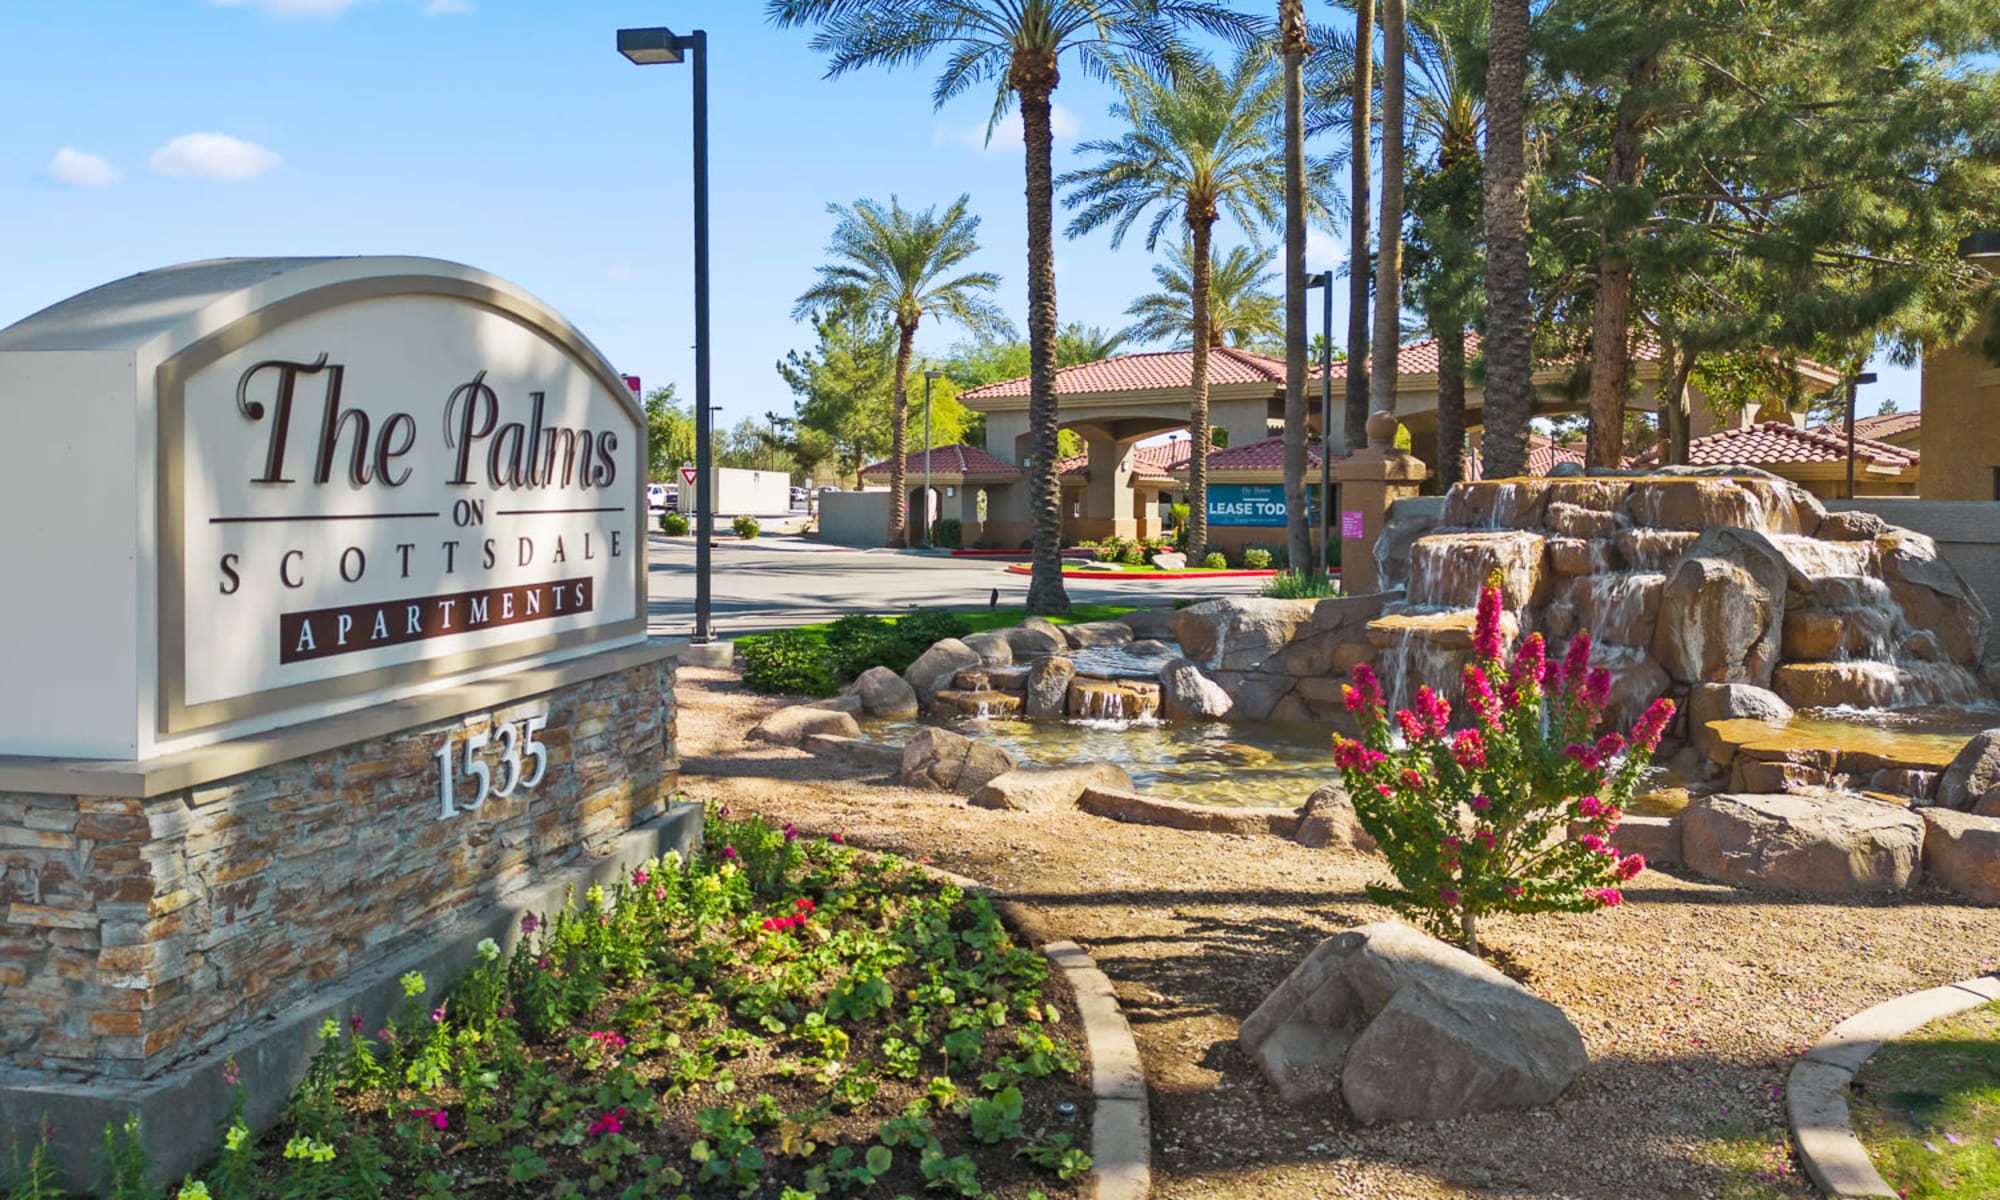 Entrance sign at The Palms on Scottsdale in Tempe, Arizona